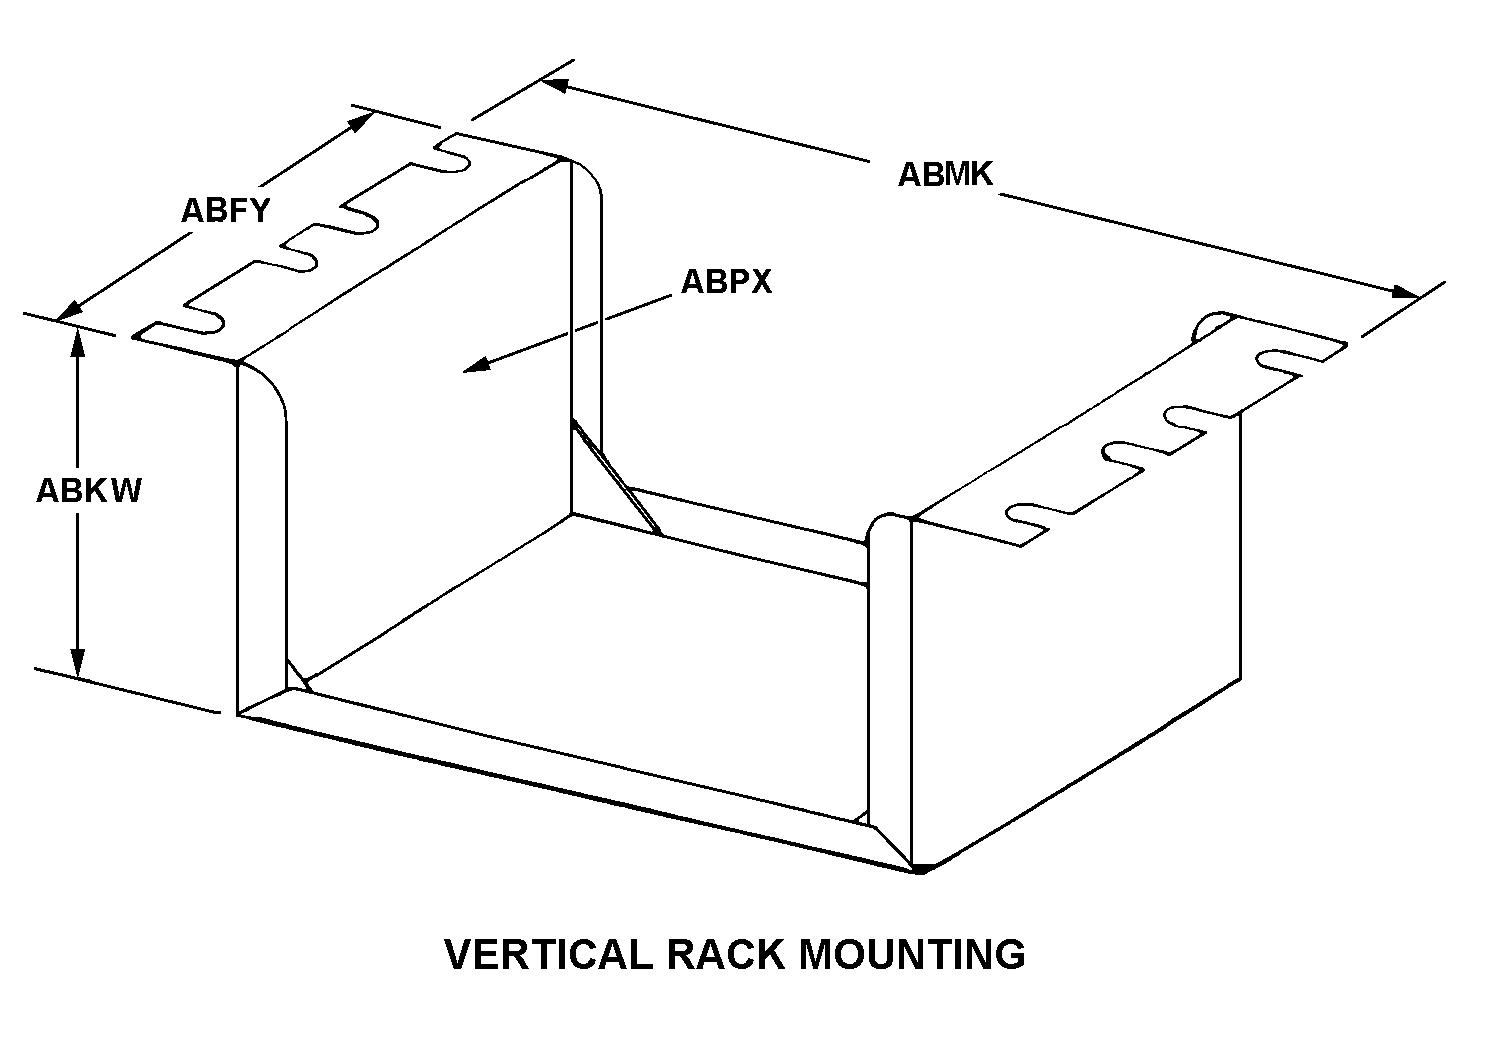 VERTICAL RACK MOUNTING style nsn 5975-01-116-4472